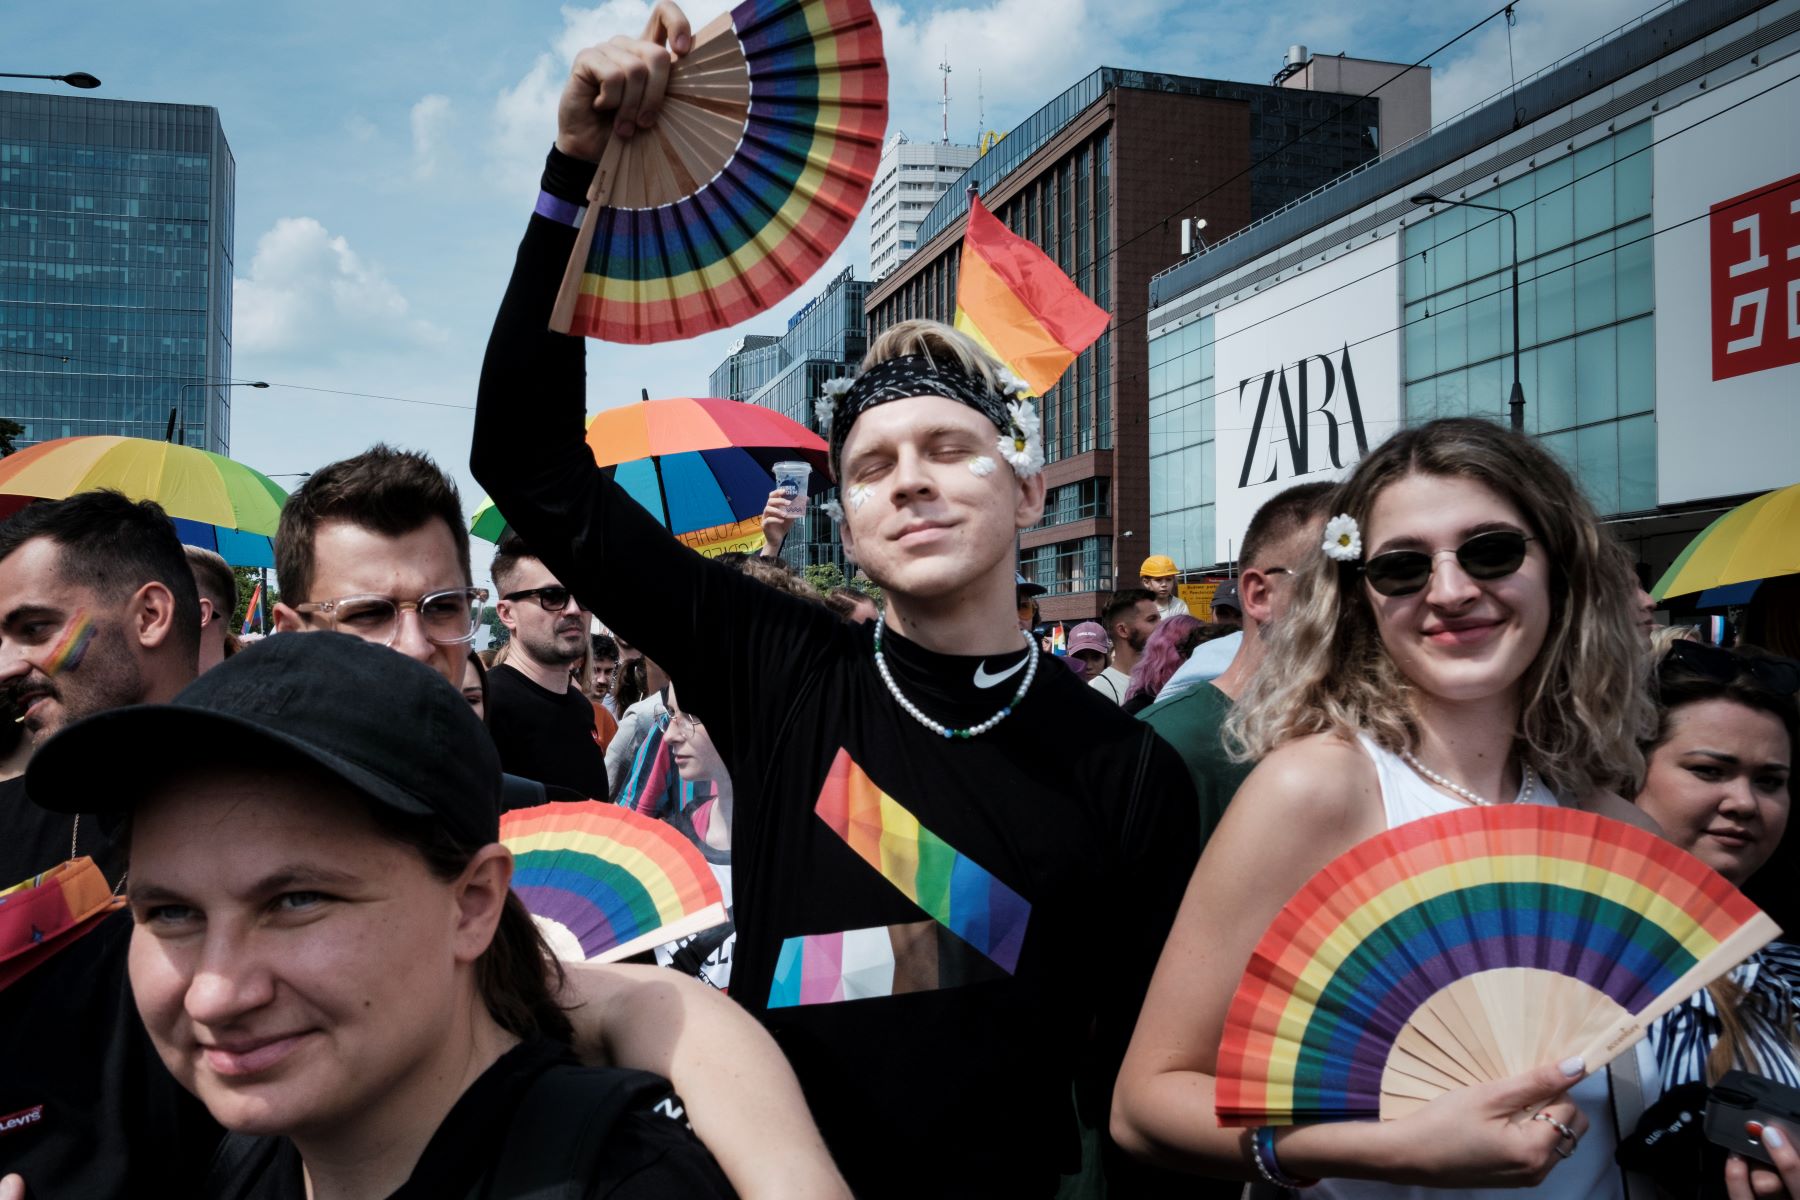 People In Poland Held A Huge Pride March To Demand The Right-Wing Government Stop Attacking LGBTQ Rights